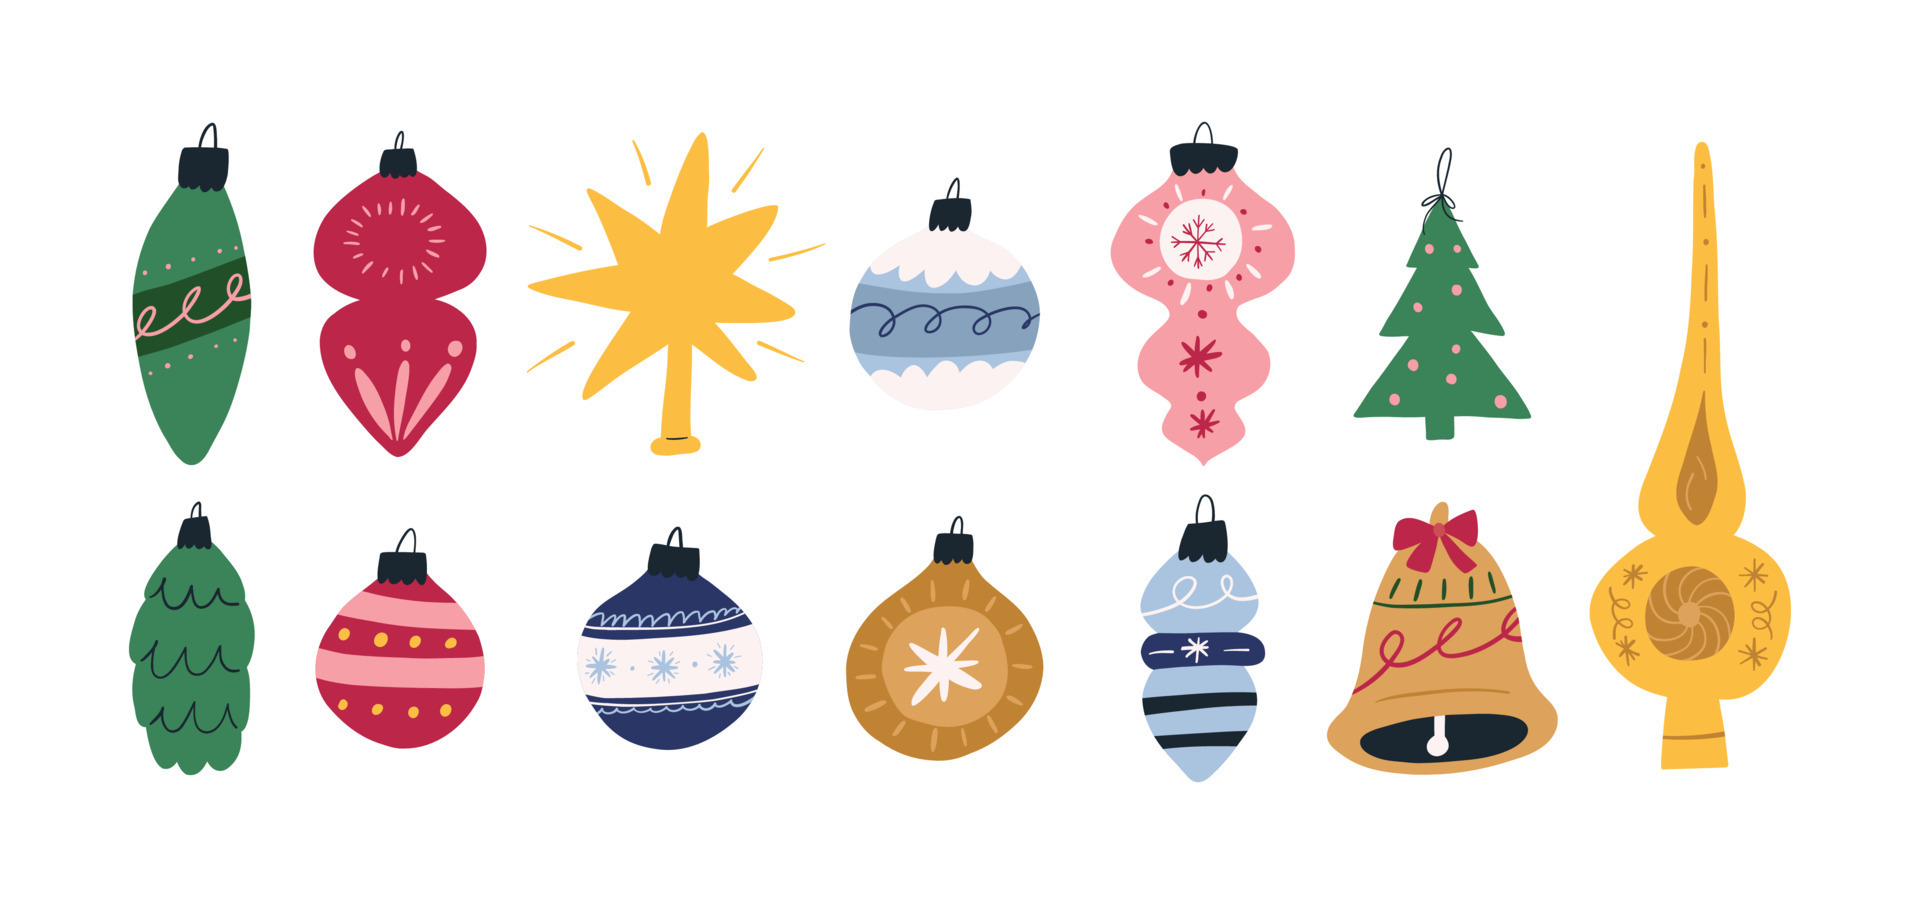 https://static.vecteezy.com/system/resources/previews/024/237/339/original/set-of-christmas-tree-ornaments-cartoon-flat-illustration-isolated-on-white-background-cute-hand-drawn-christmas-decorations-colorful-retro-baubles-vector.jpg